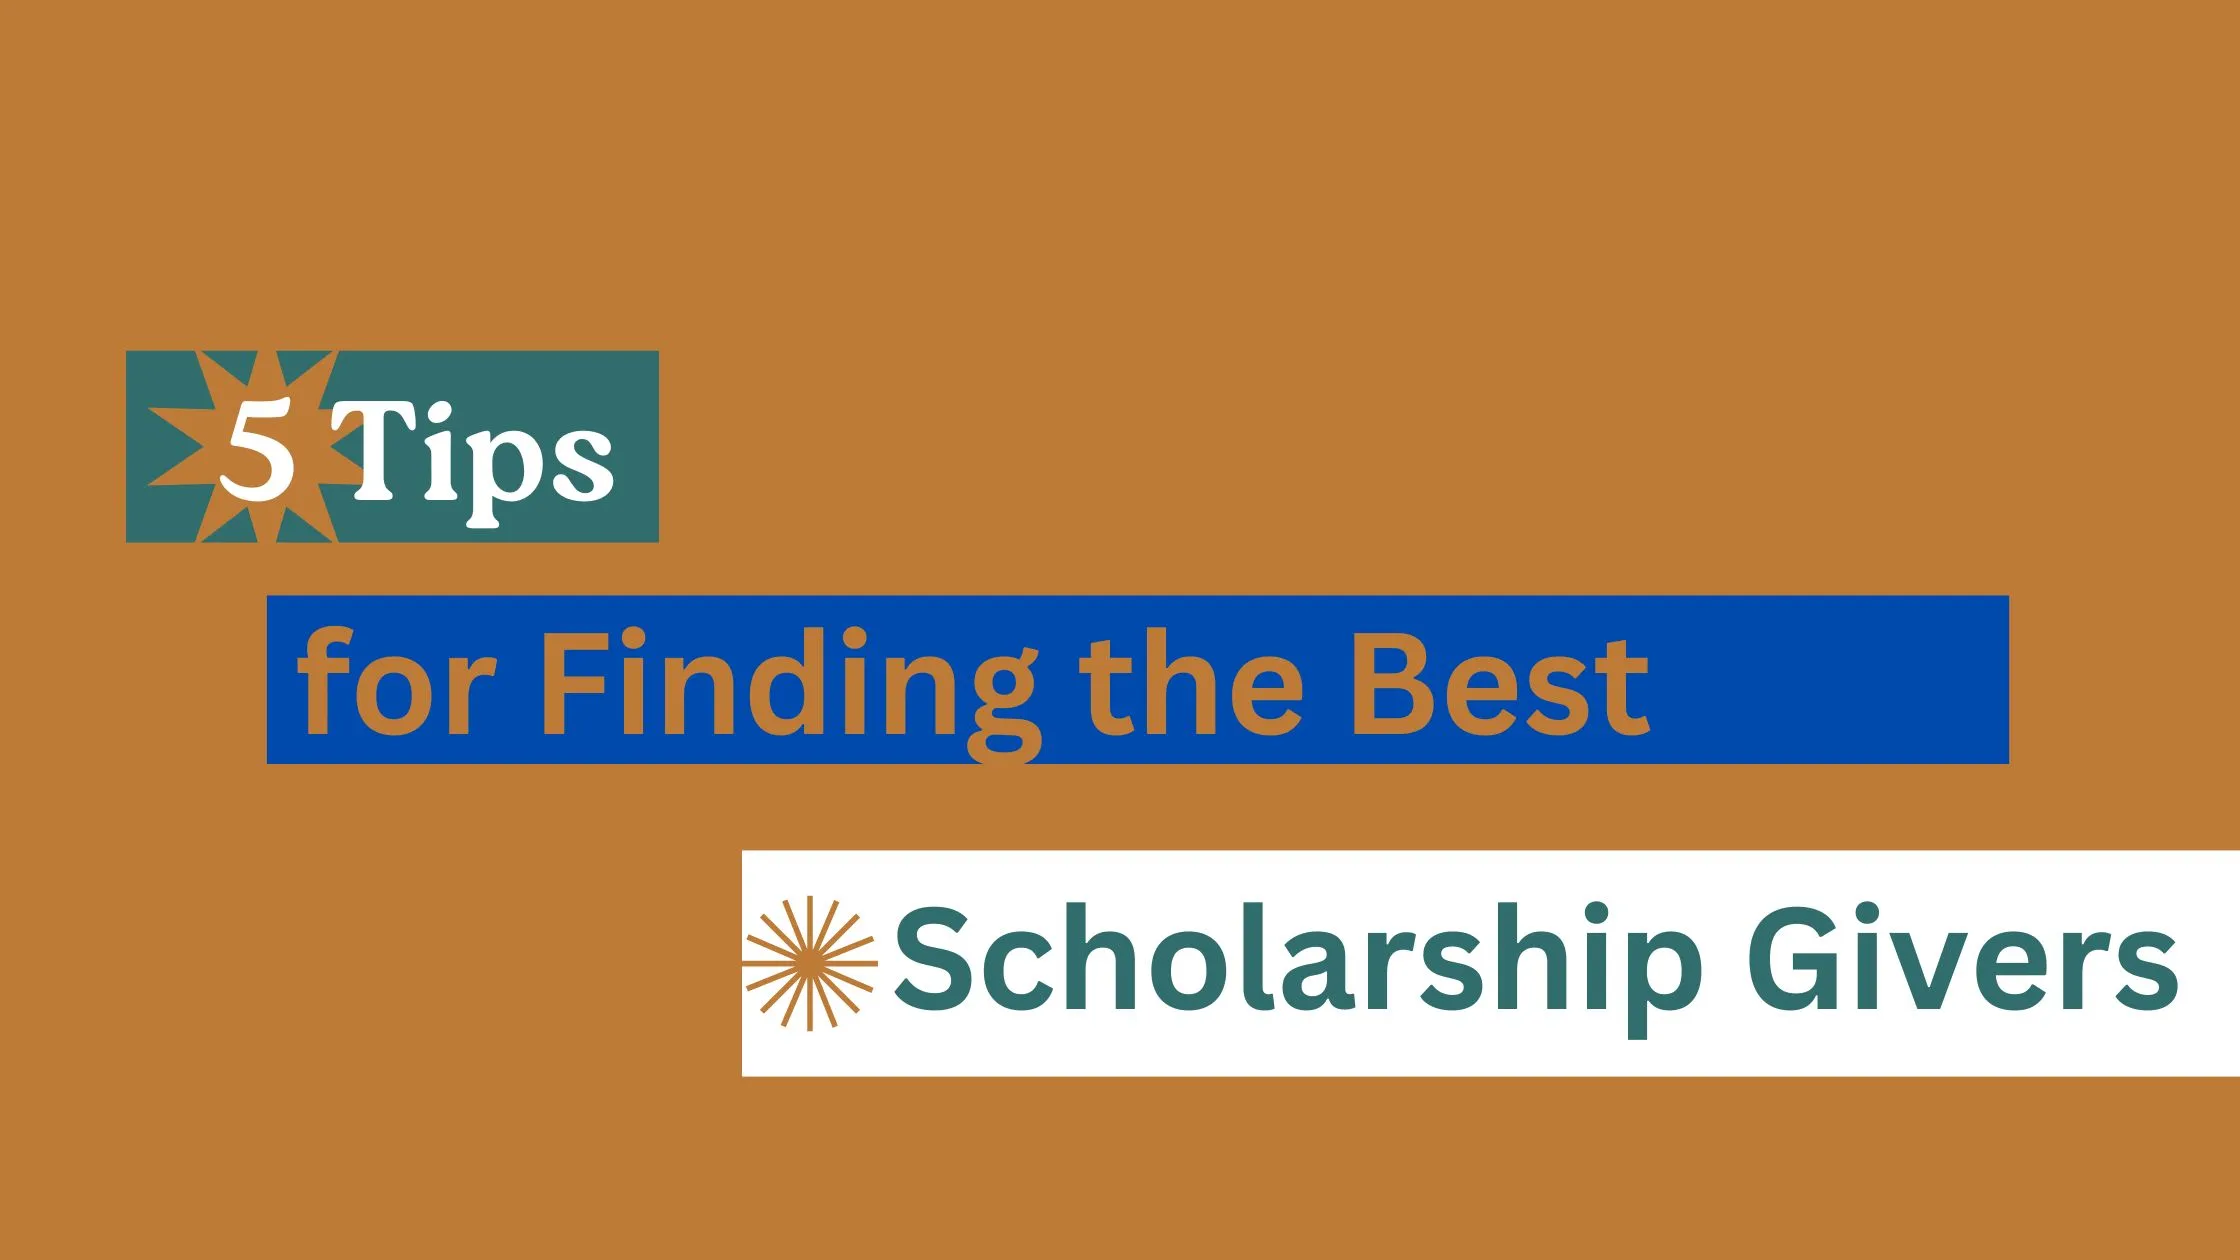 5 Tips for Finding the Best Scholarship Givers